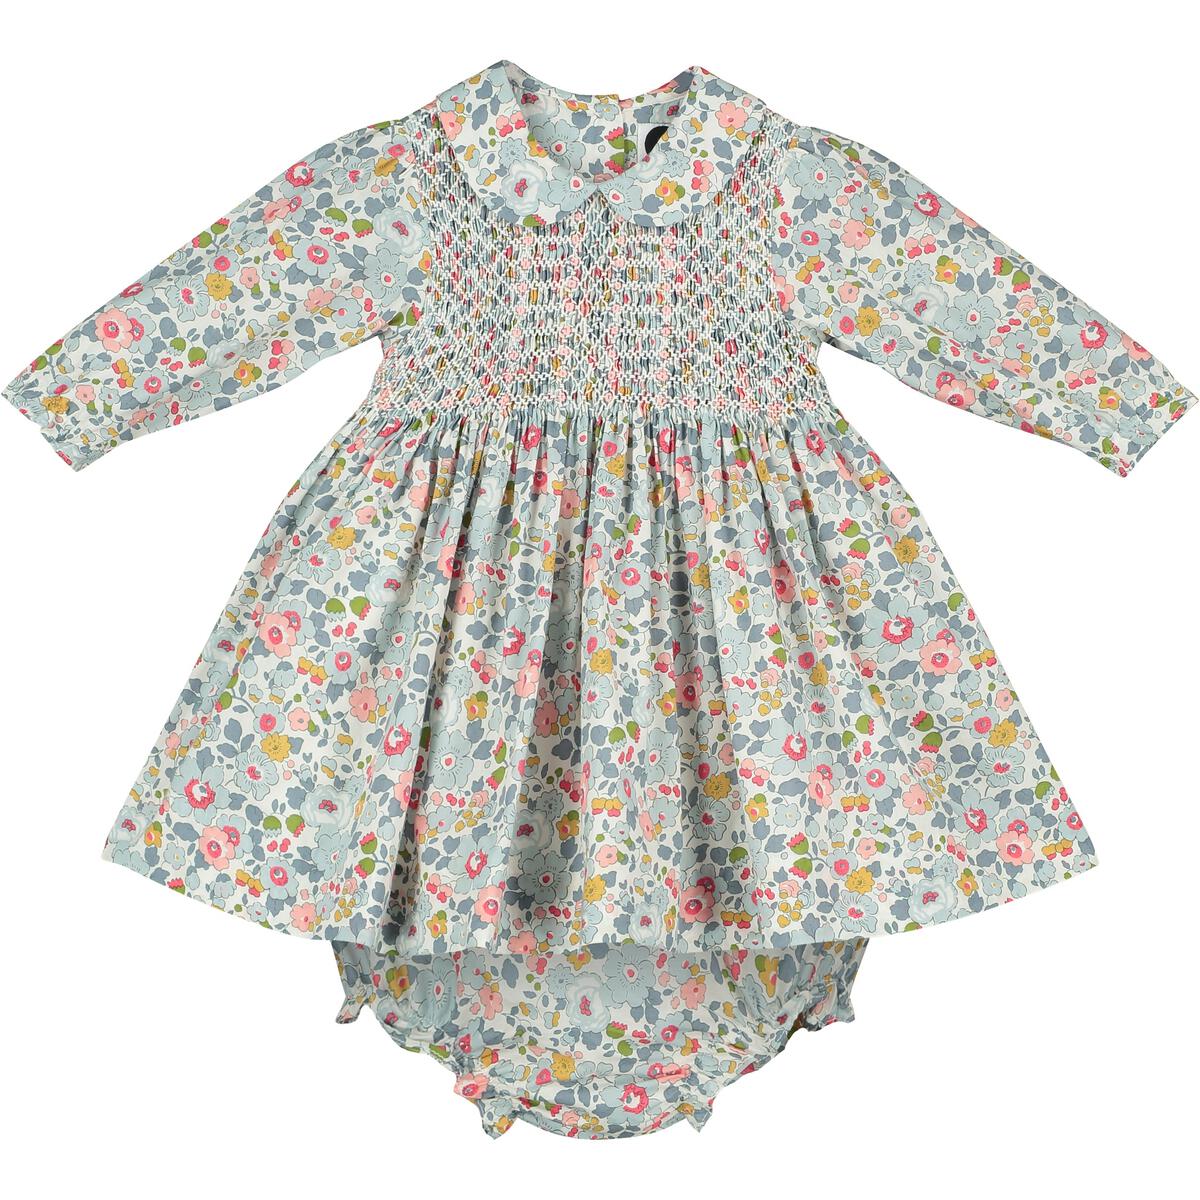 Long sleeved Liberty floral print smocked baby dress. with bloomers. 